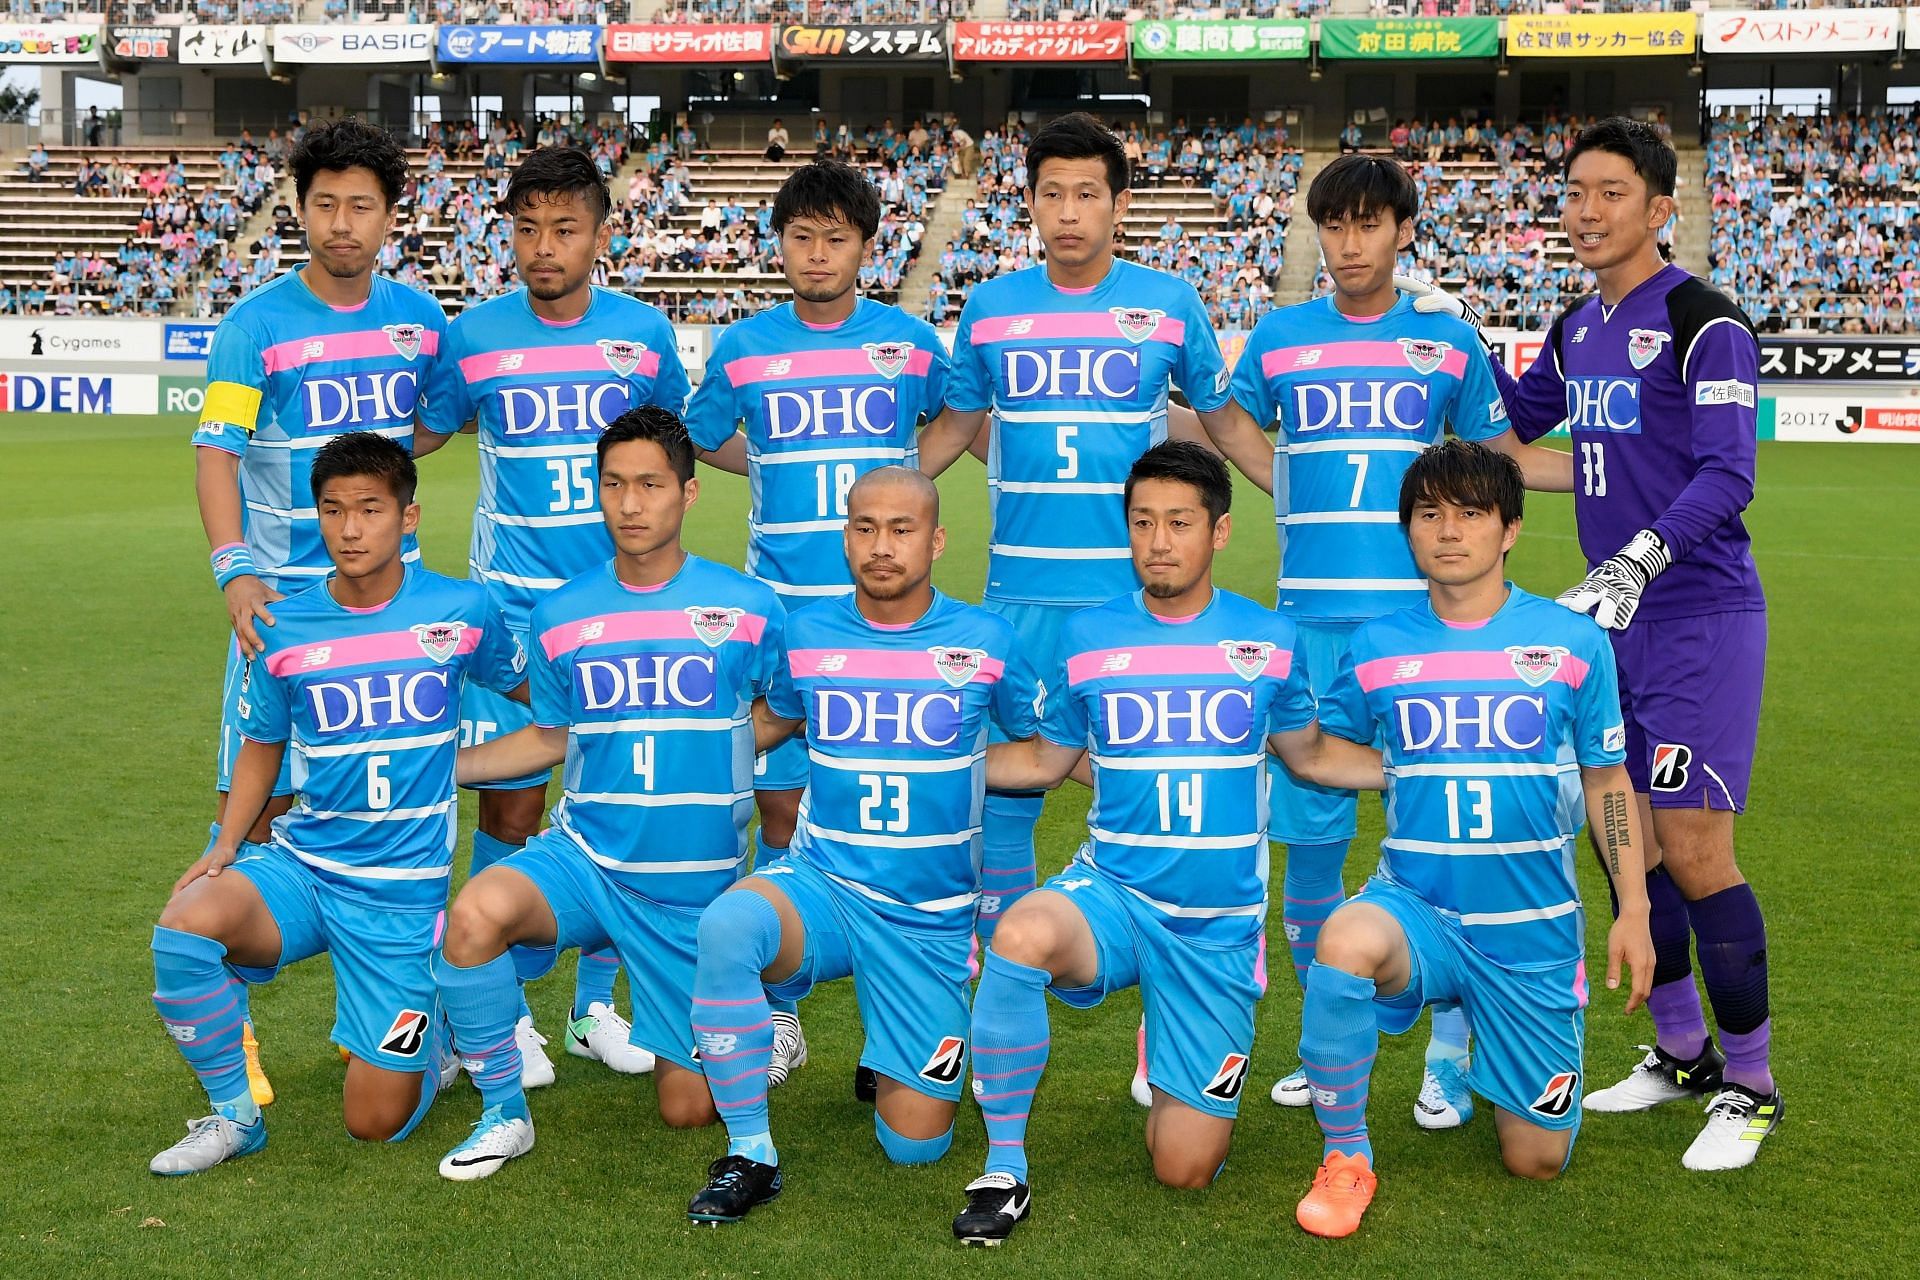 Sagan Tosu will be looking to win the game